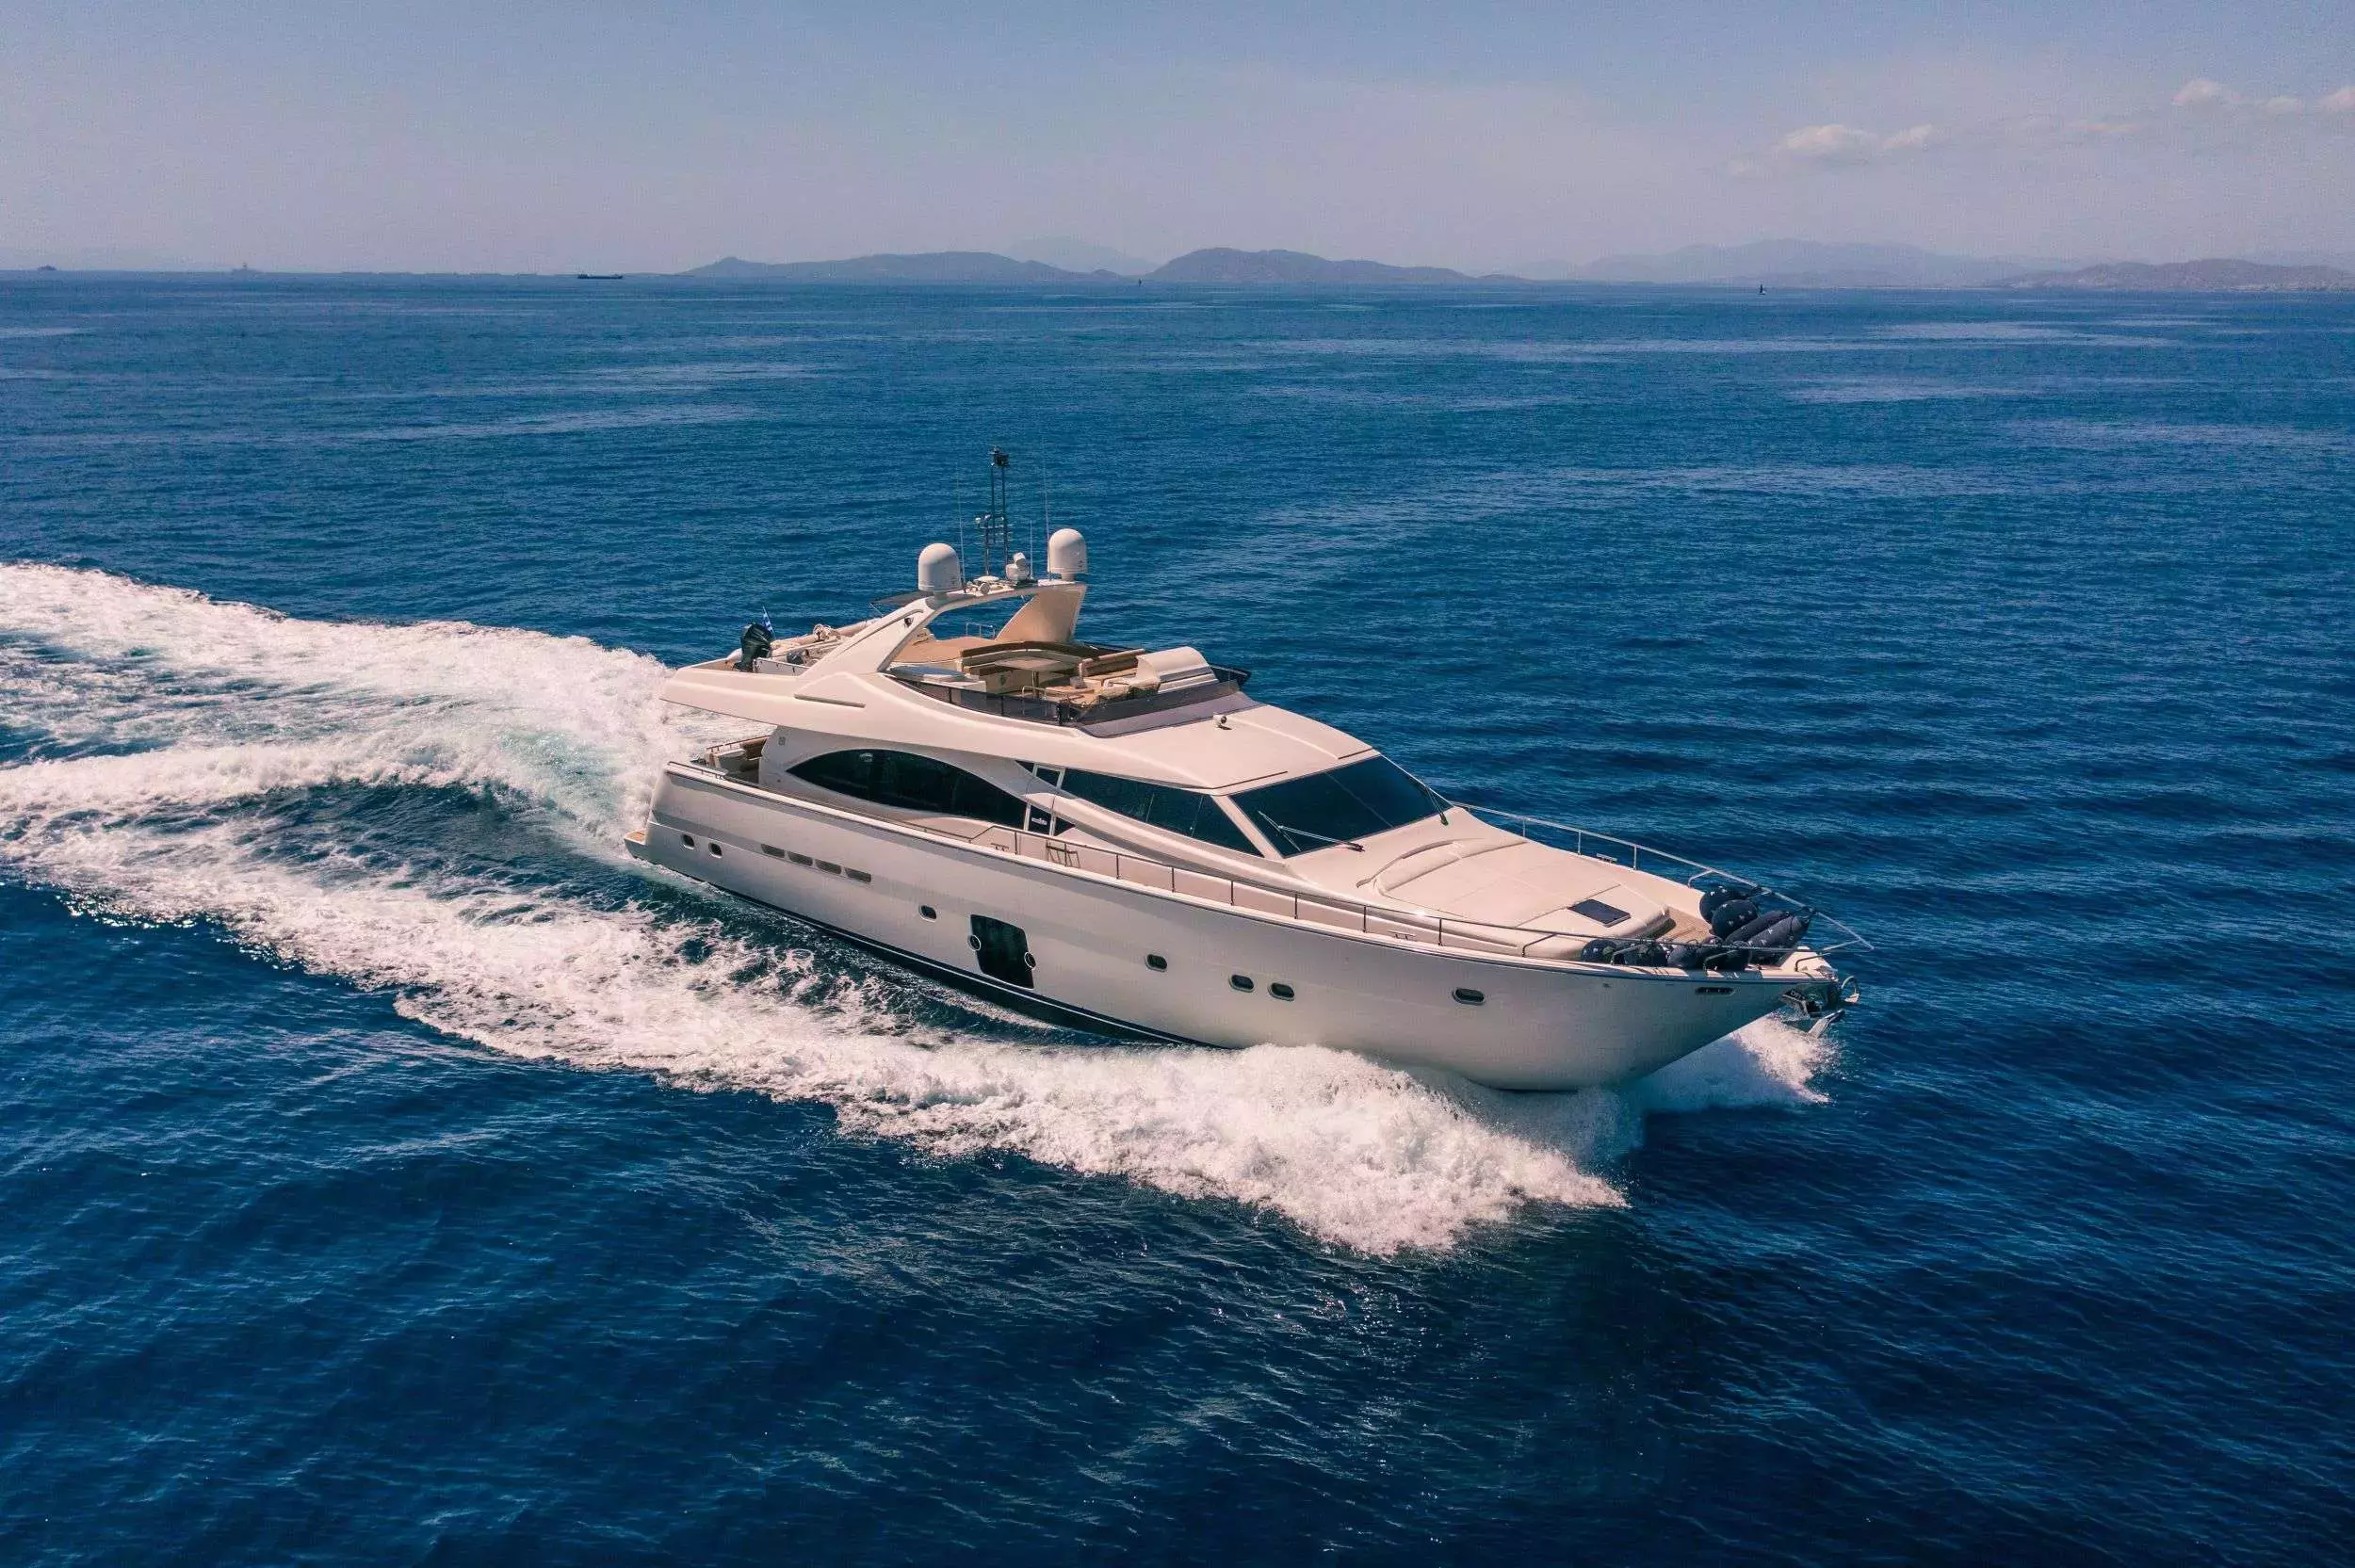 Annouka by Ferretti - Special Offer for a private Motor Yacht Charter in Salamis with a crew